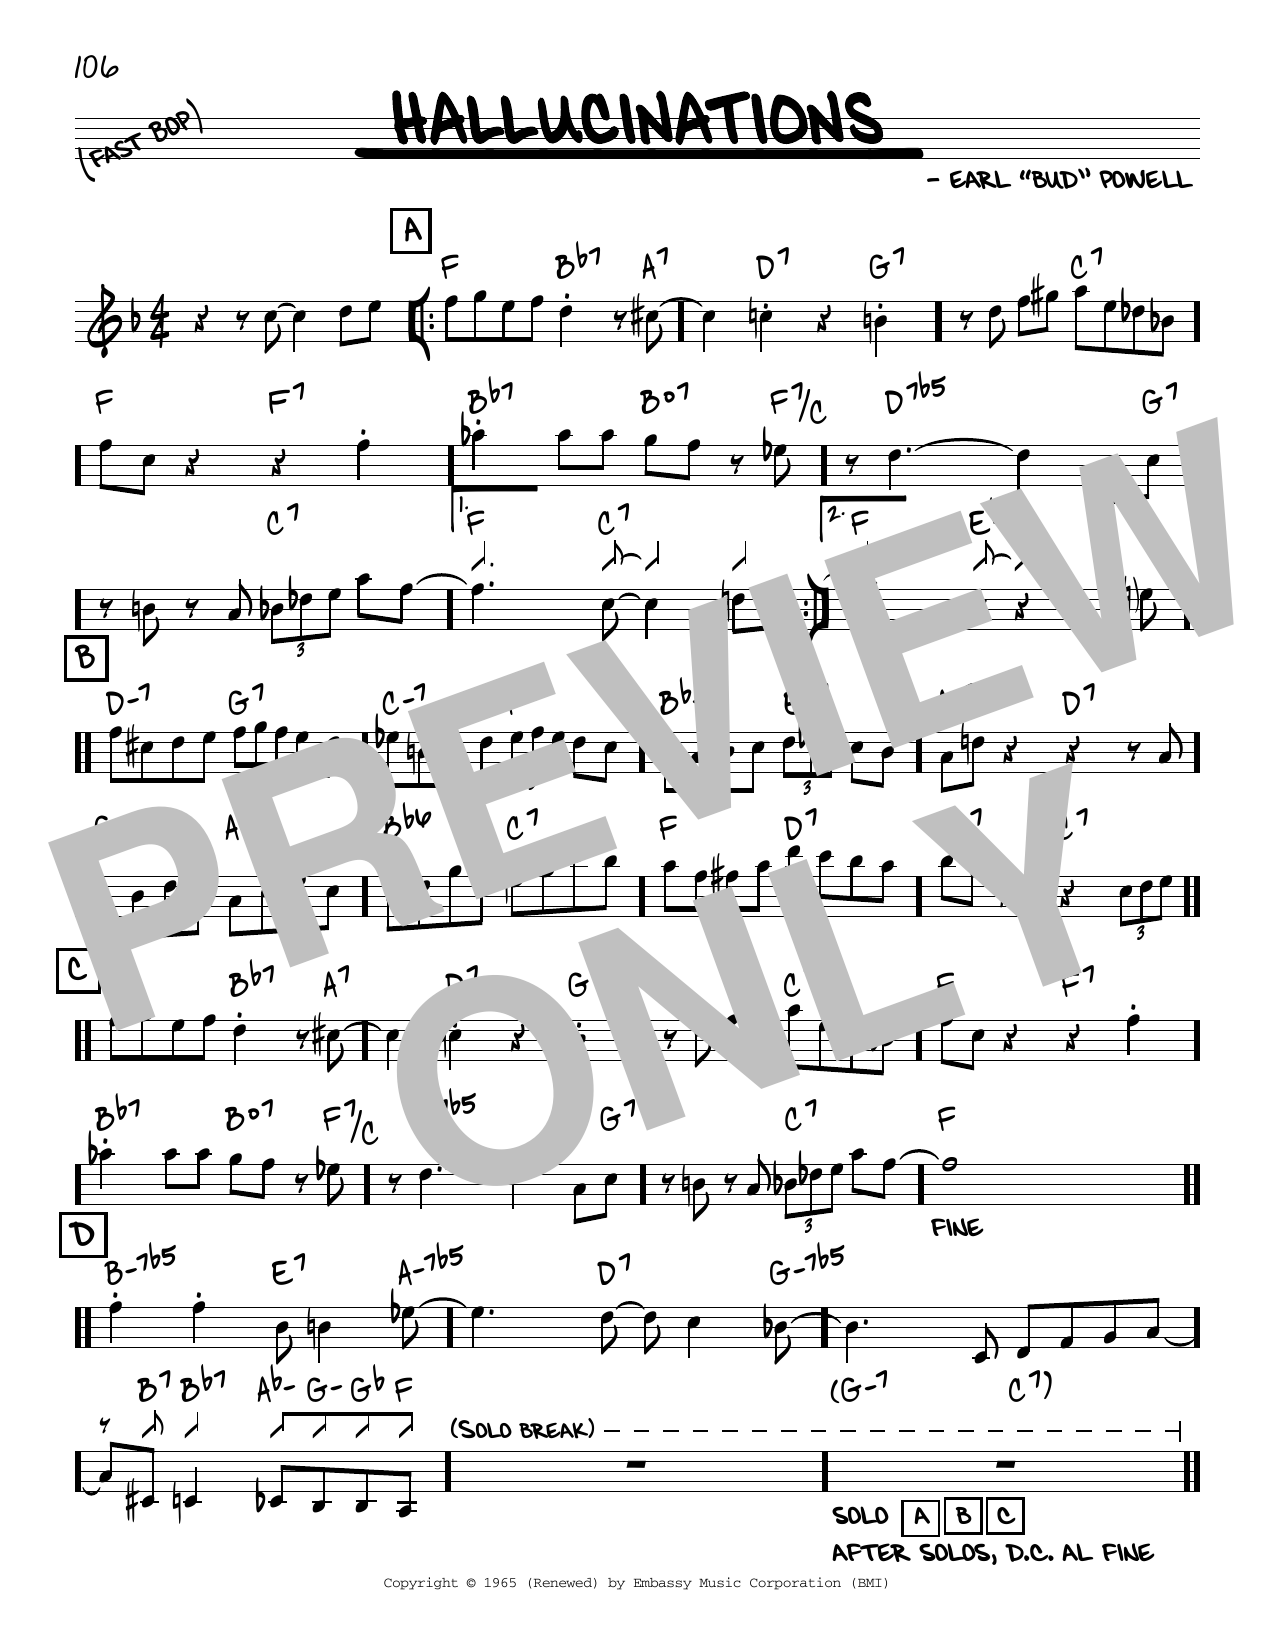 Download Bud Powell Hallucinations Sheet Music